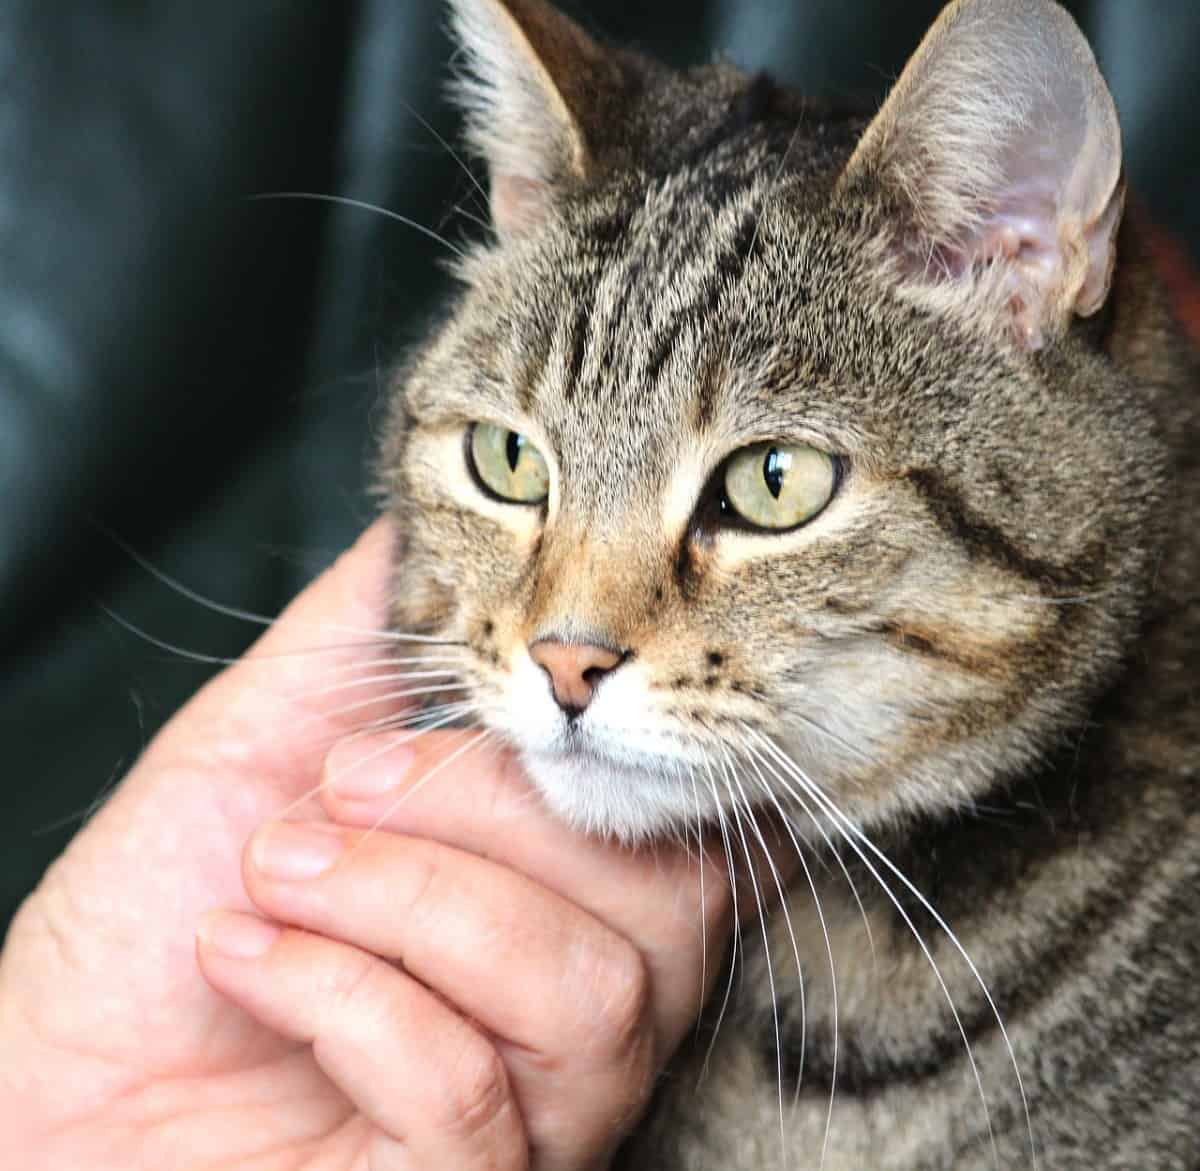 Delving into Feline Affection: Why Does My Cat Bury His Head in My Hand?